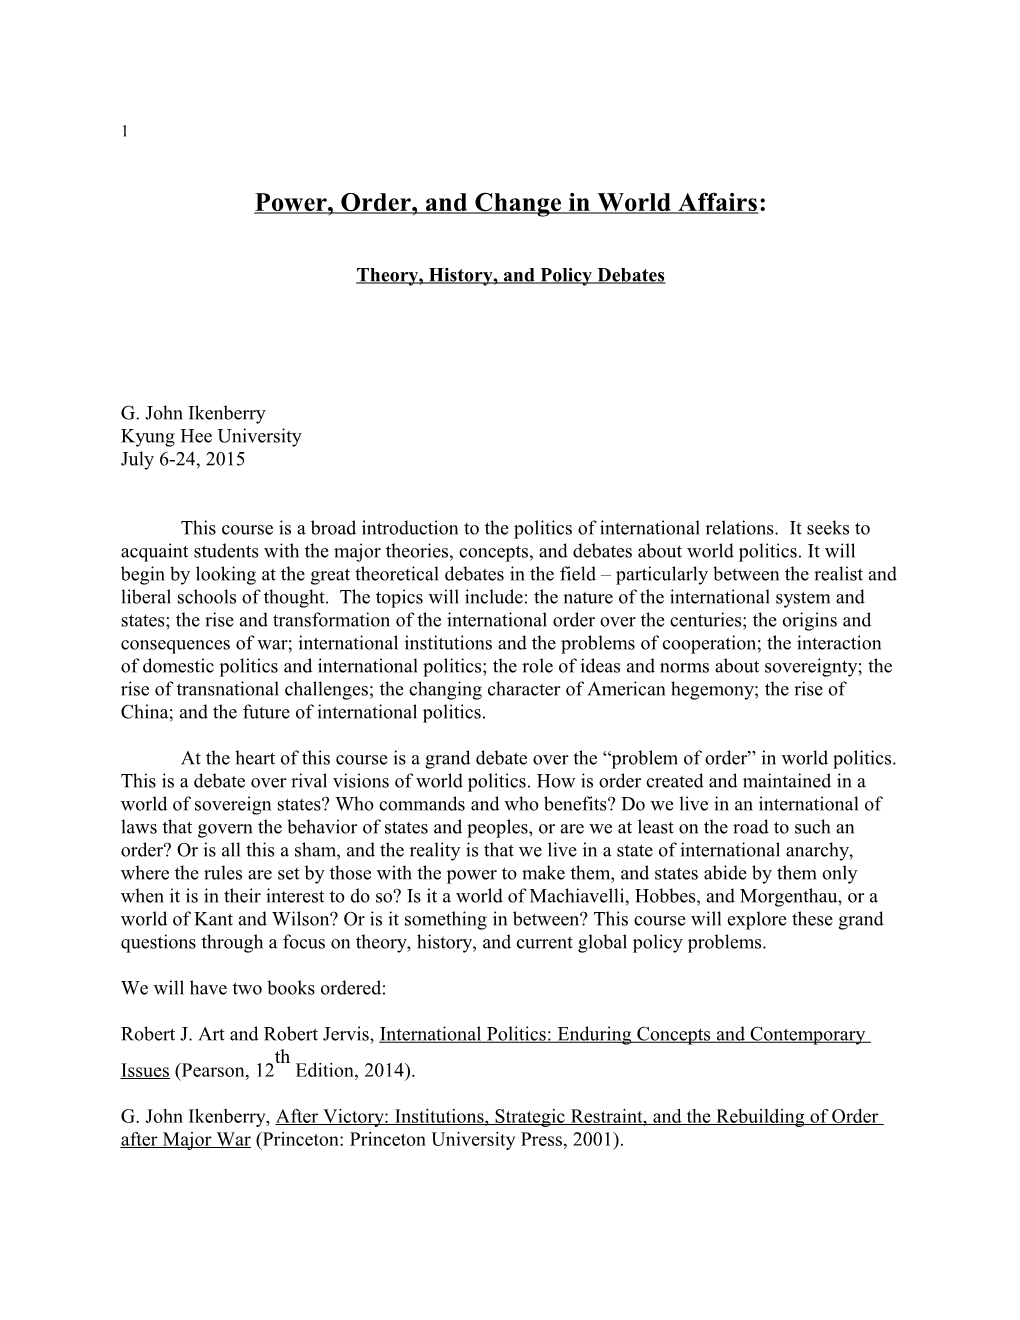 Power, Order, and Change in World Affairs